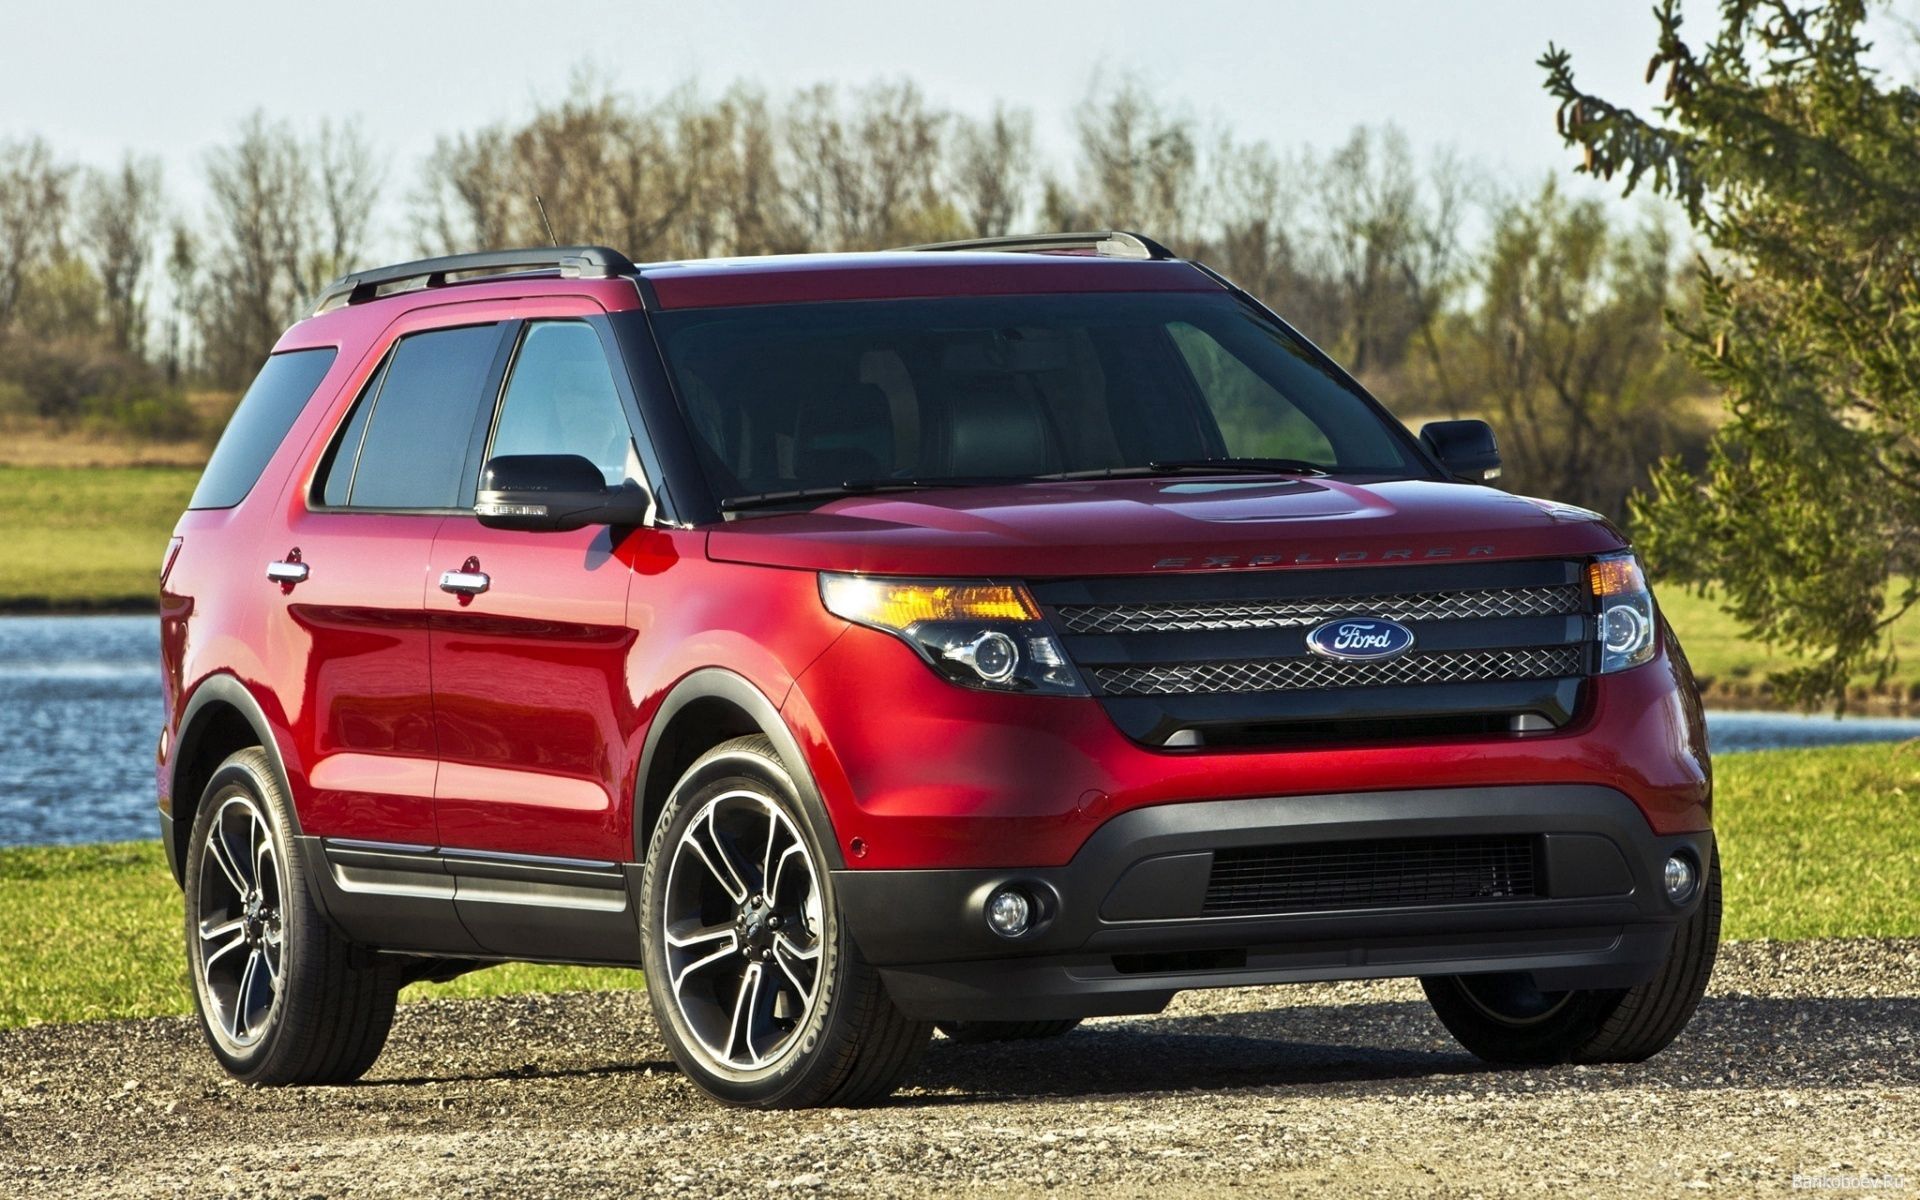 Horizontal Wallpaper ford, auto, cars, red, ford explorer